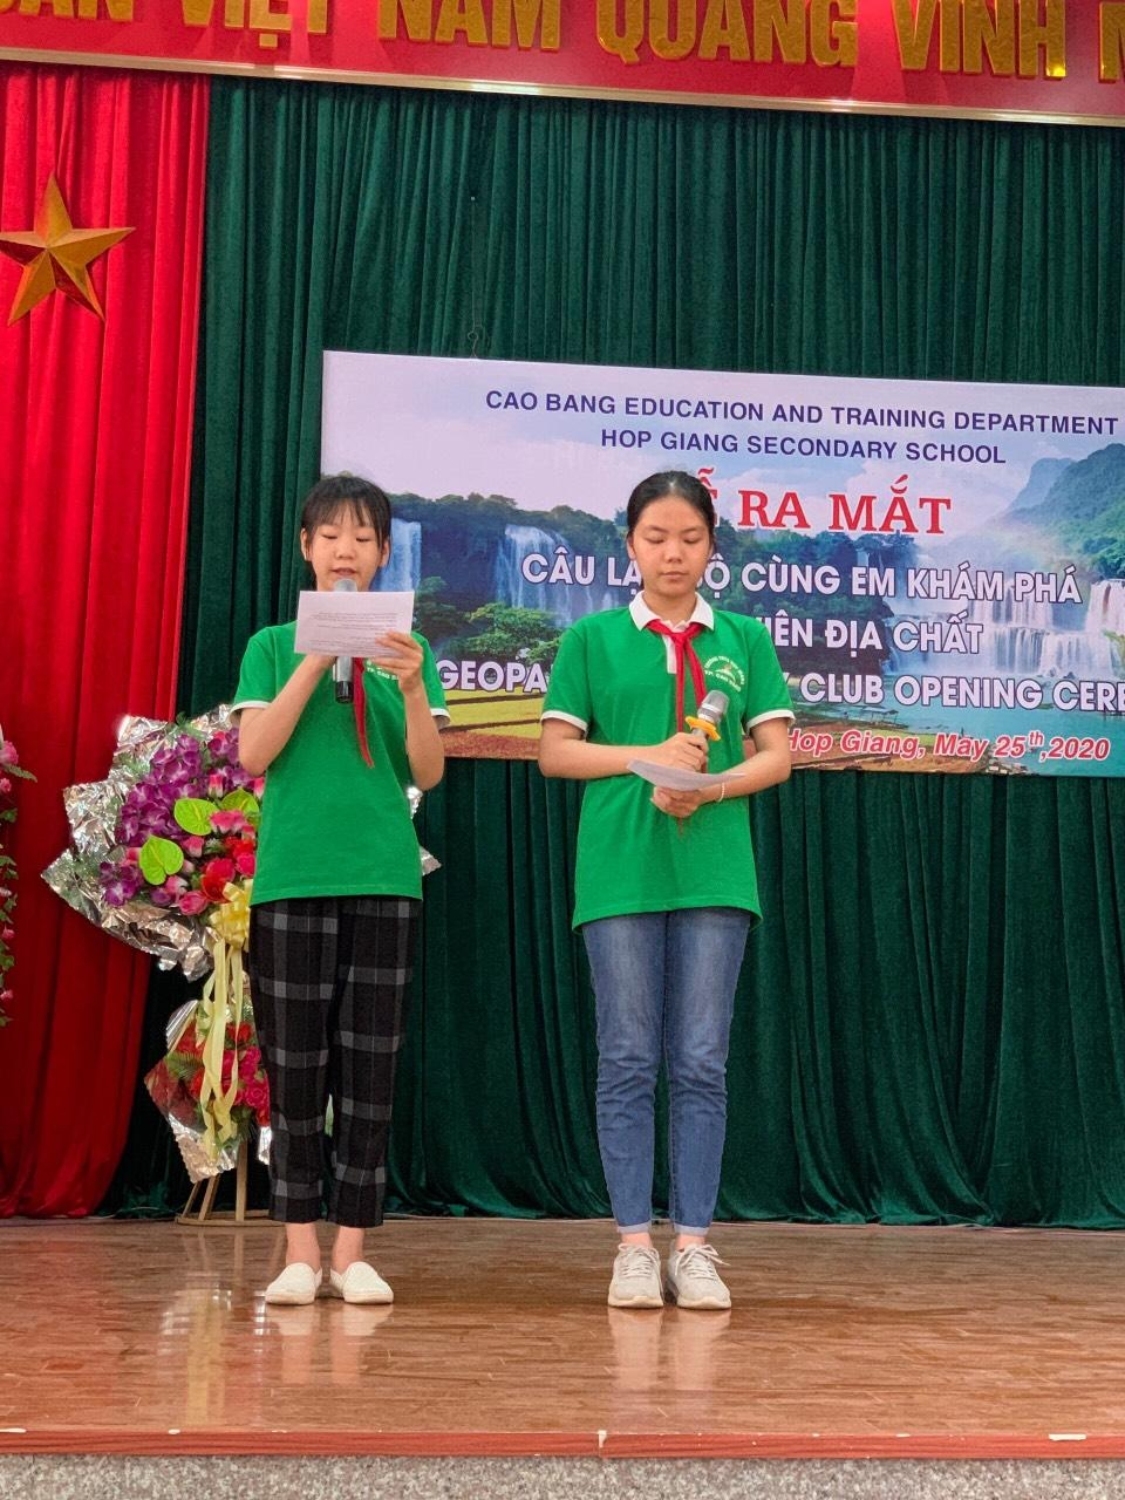 Opening ceremony of “Geopark discovery club” in Hop Giang secondary school